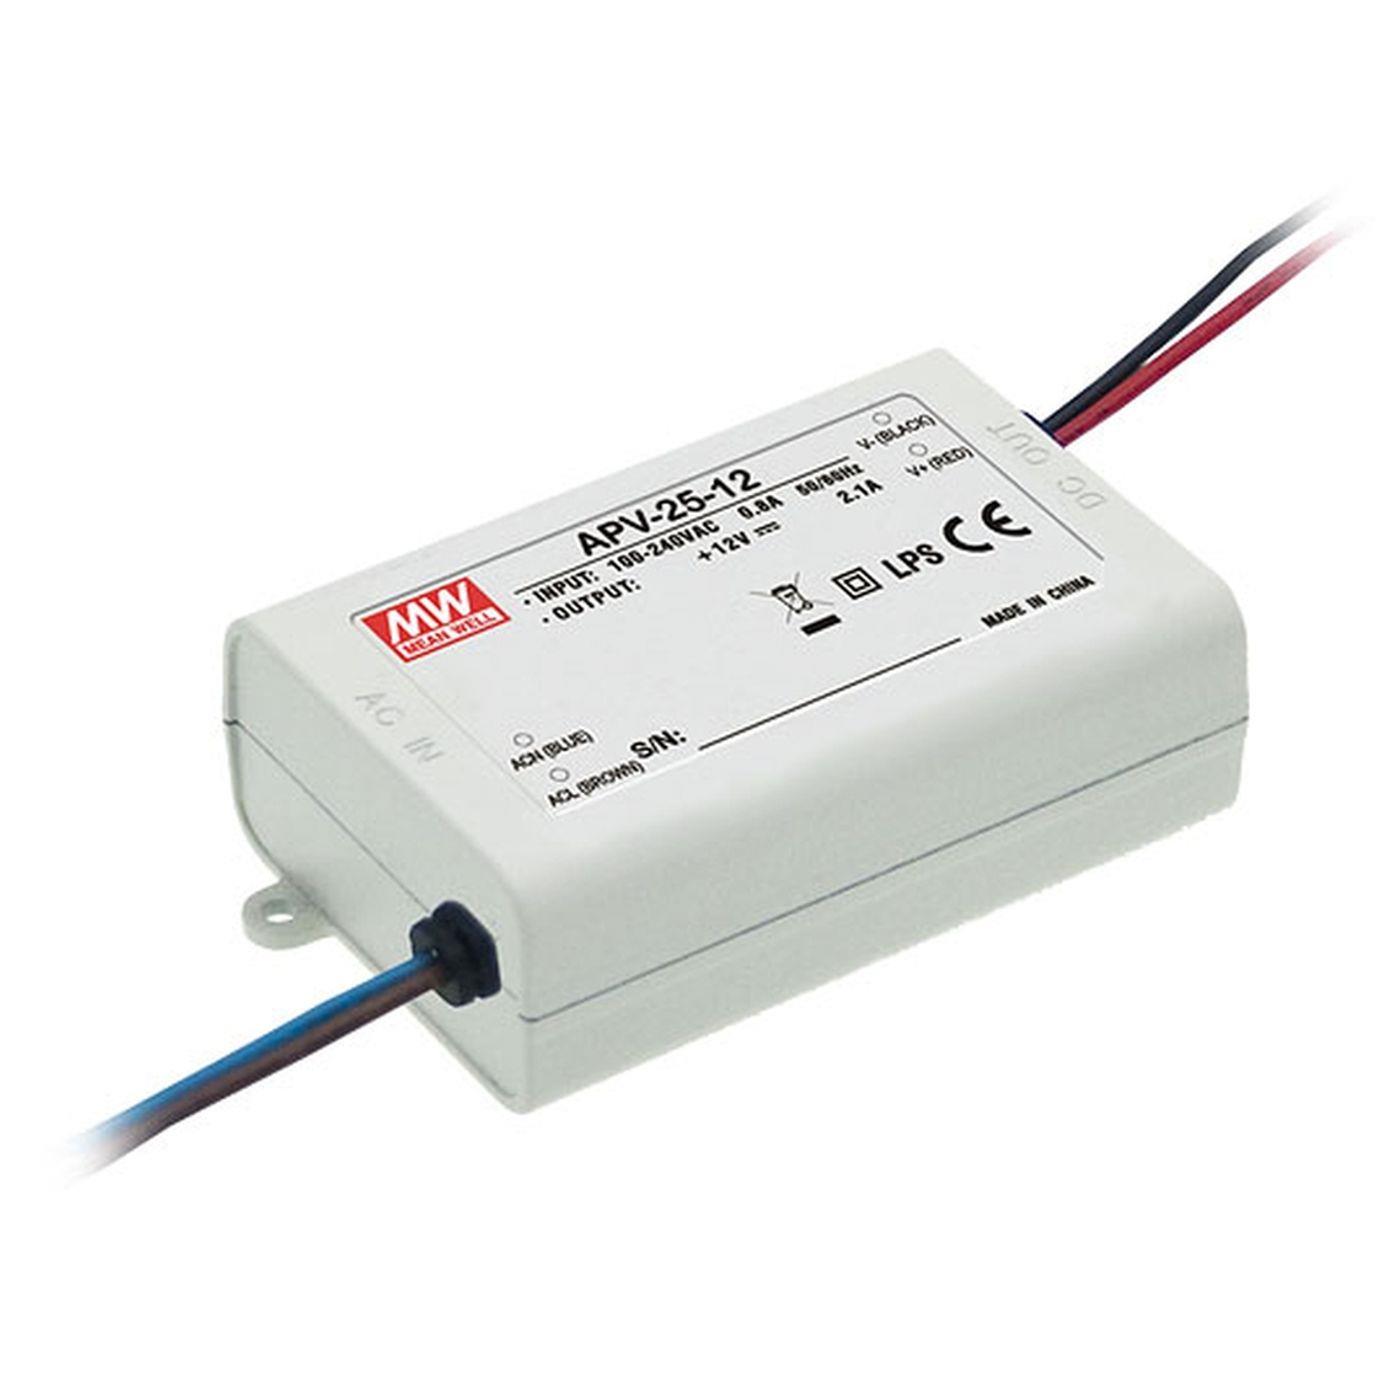 APC-25-500 25W 500mA 15...50VDC Constant current LED power supply Driver Transformer